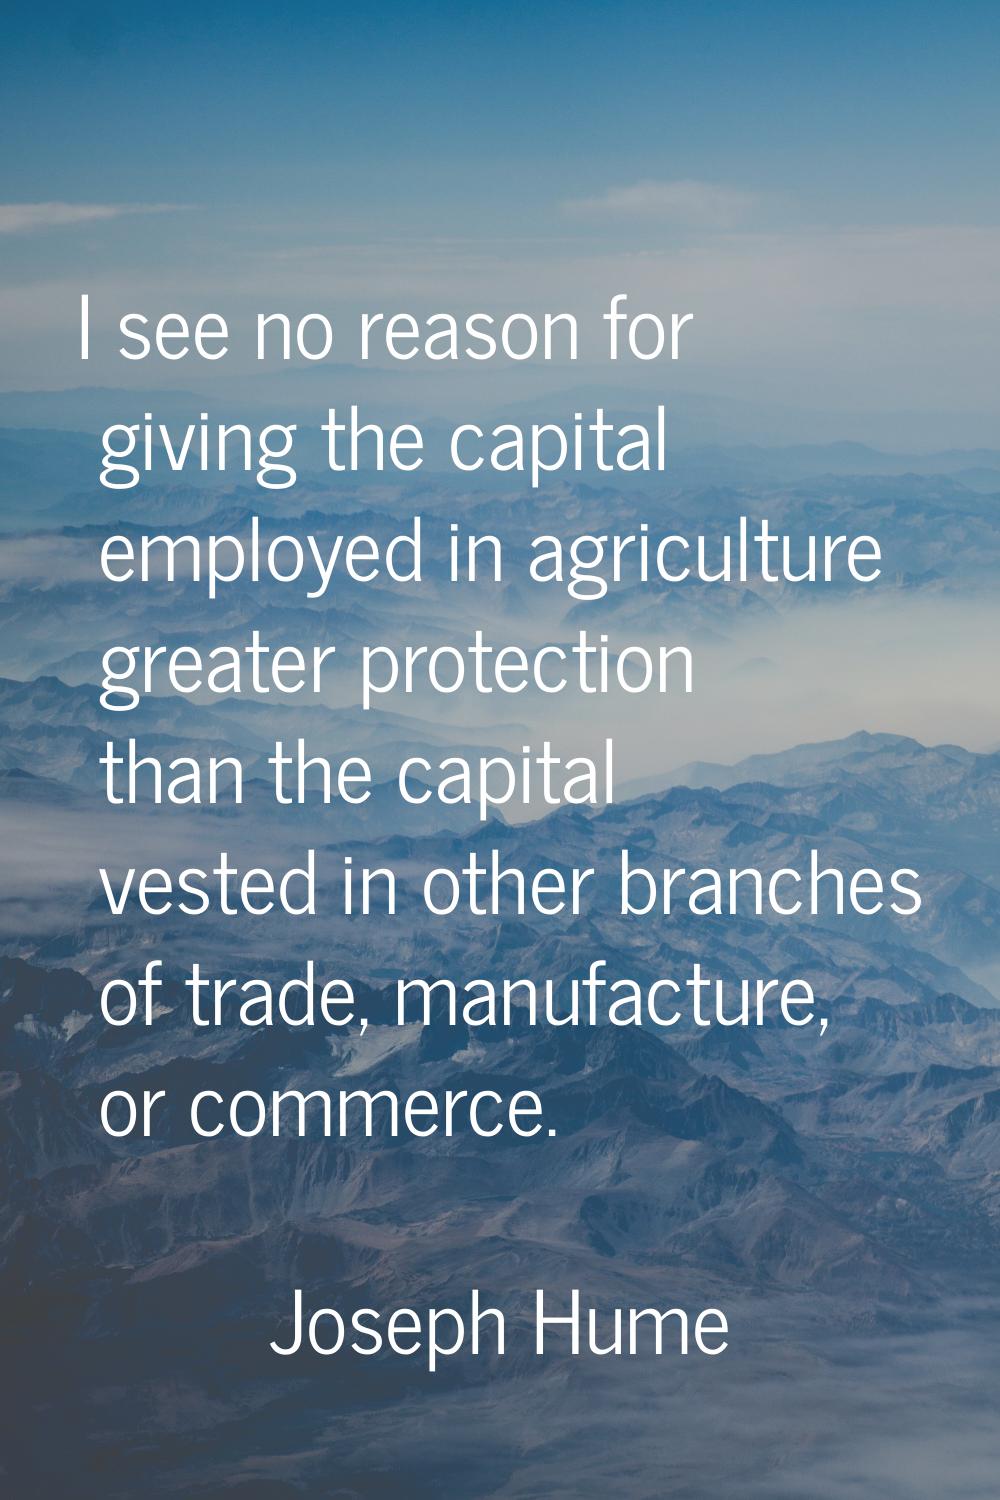 I see no reason for giving the capital employed in agriculture greater protection than the capital 